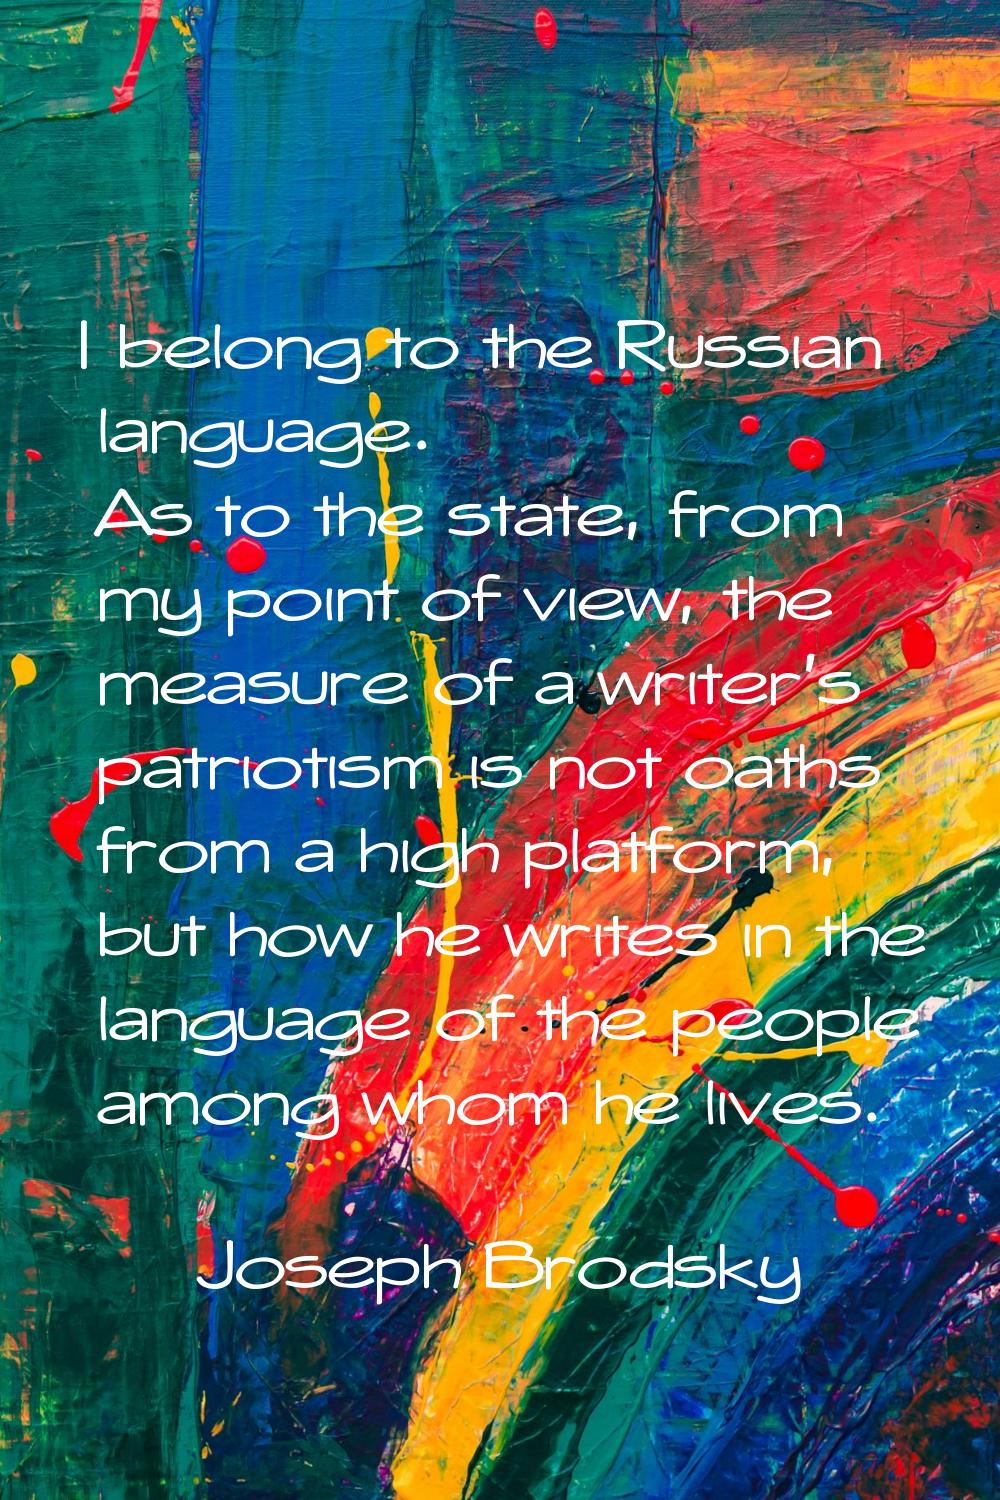 I belong to the Russian language. As to the state, from my point of view, the measure of a writer's